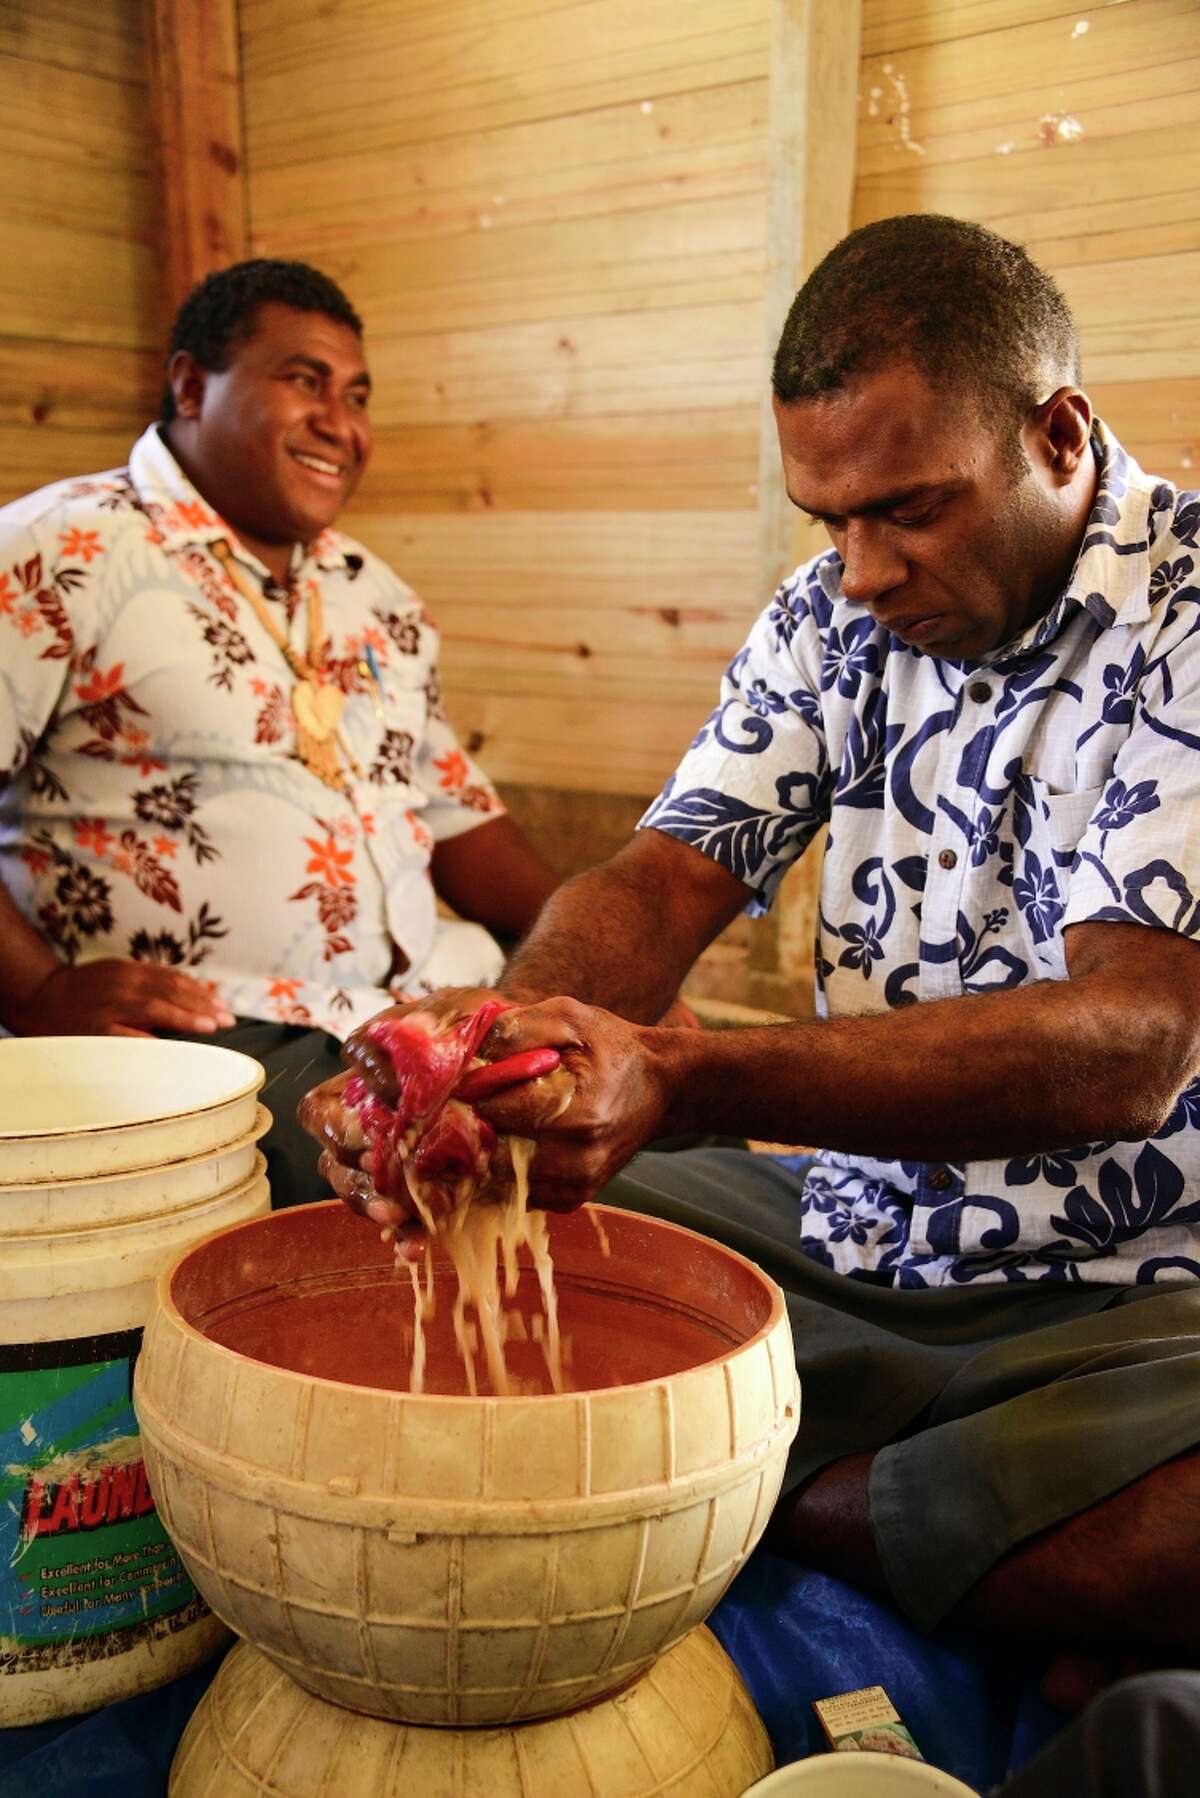 Left: Kava, Fiji’s national drink, is made from the pulverized root of a member of the pepper family.